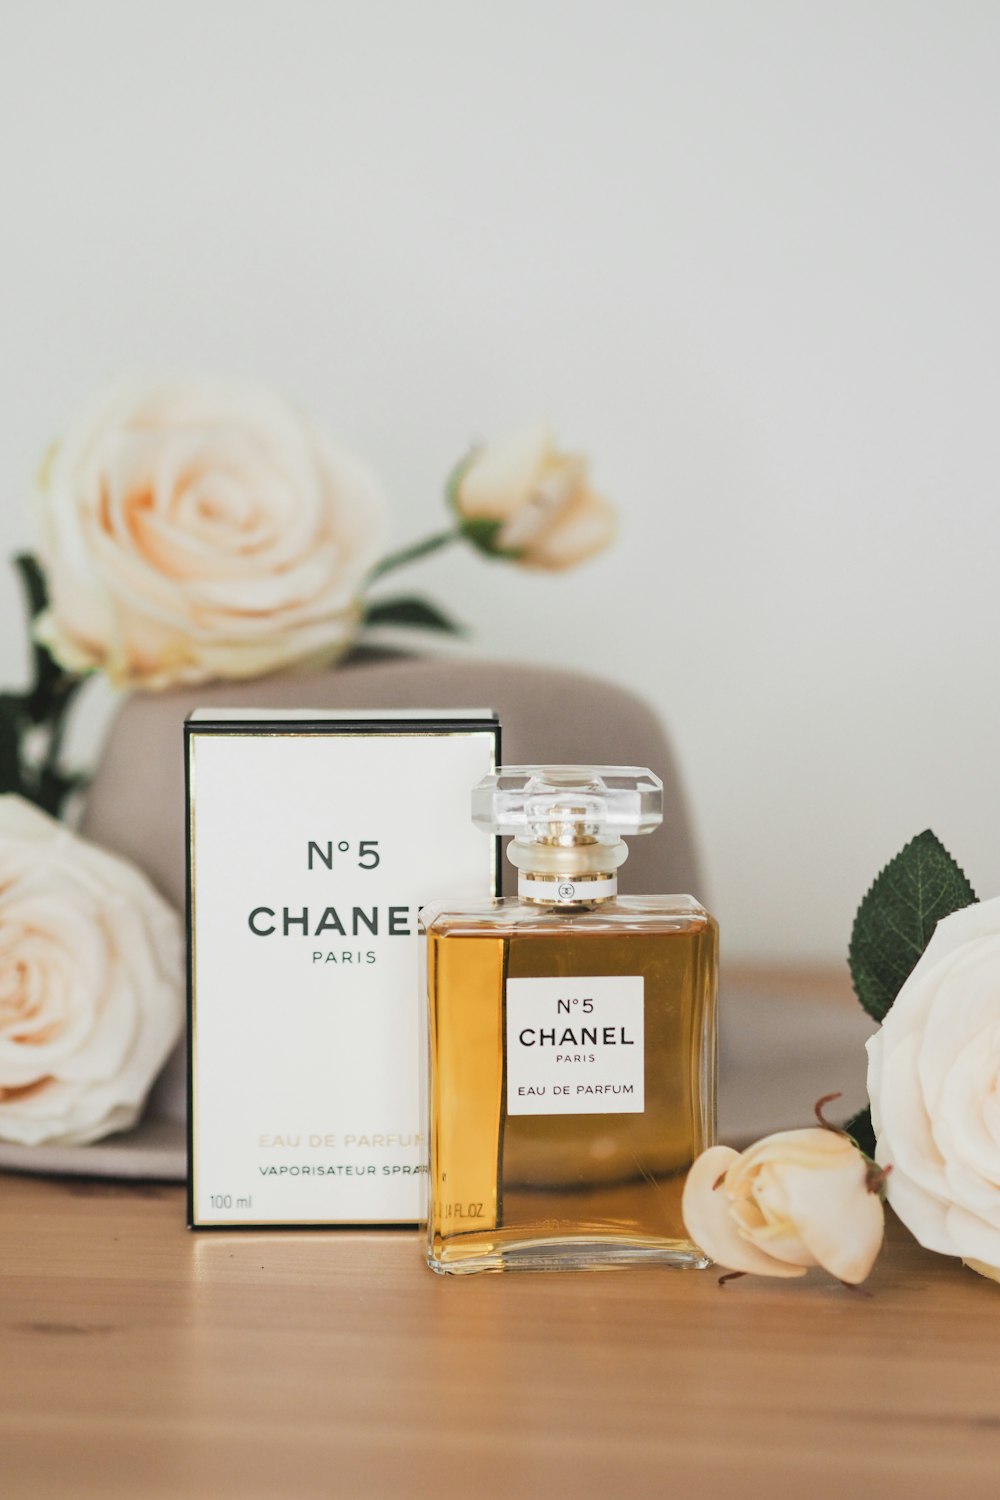 A bottle of chanel no 5 next to a box of perfume photo – Free Plant Image  on Unsplash